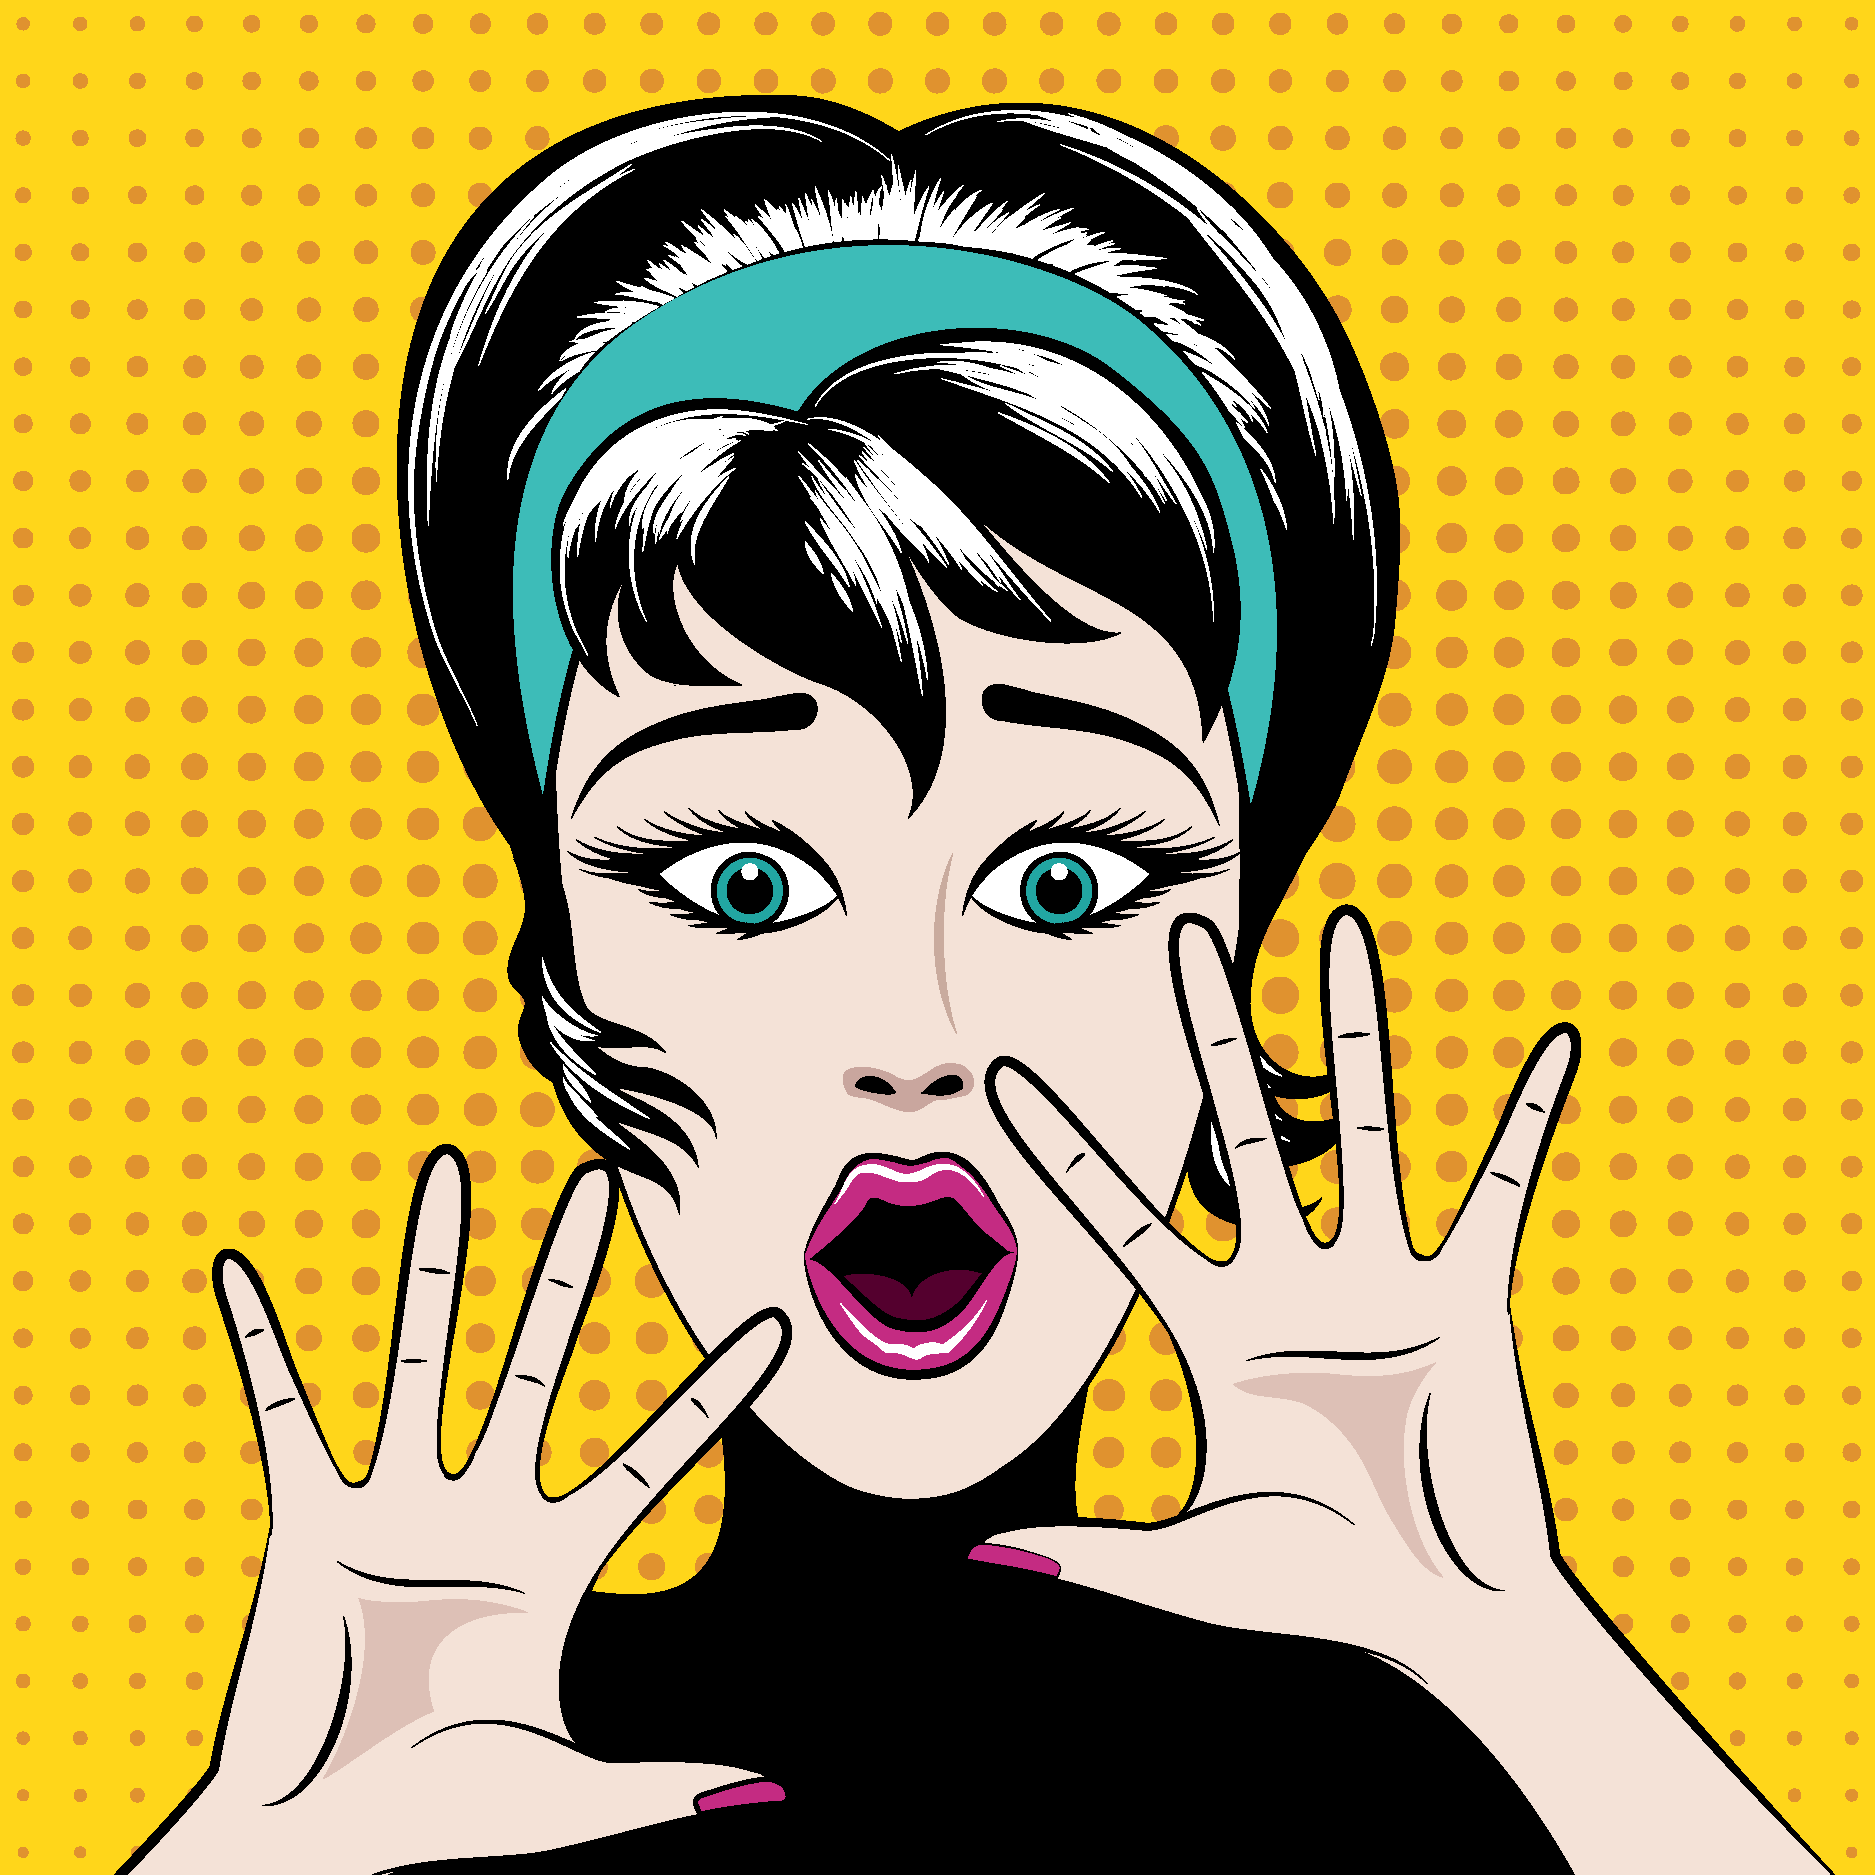 pop art image of woman with hands up in front of her face and an "Oh No" expression. She needs a break-up recovery process and coaching.